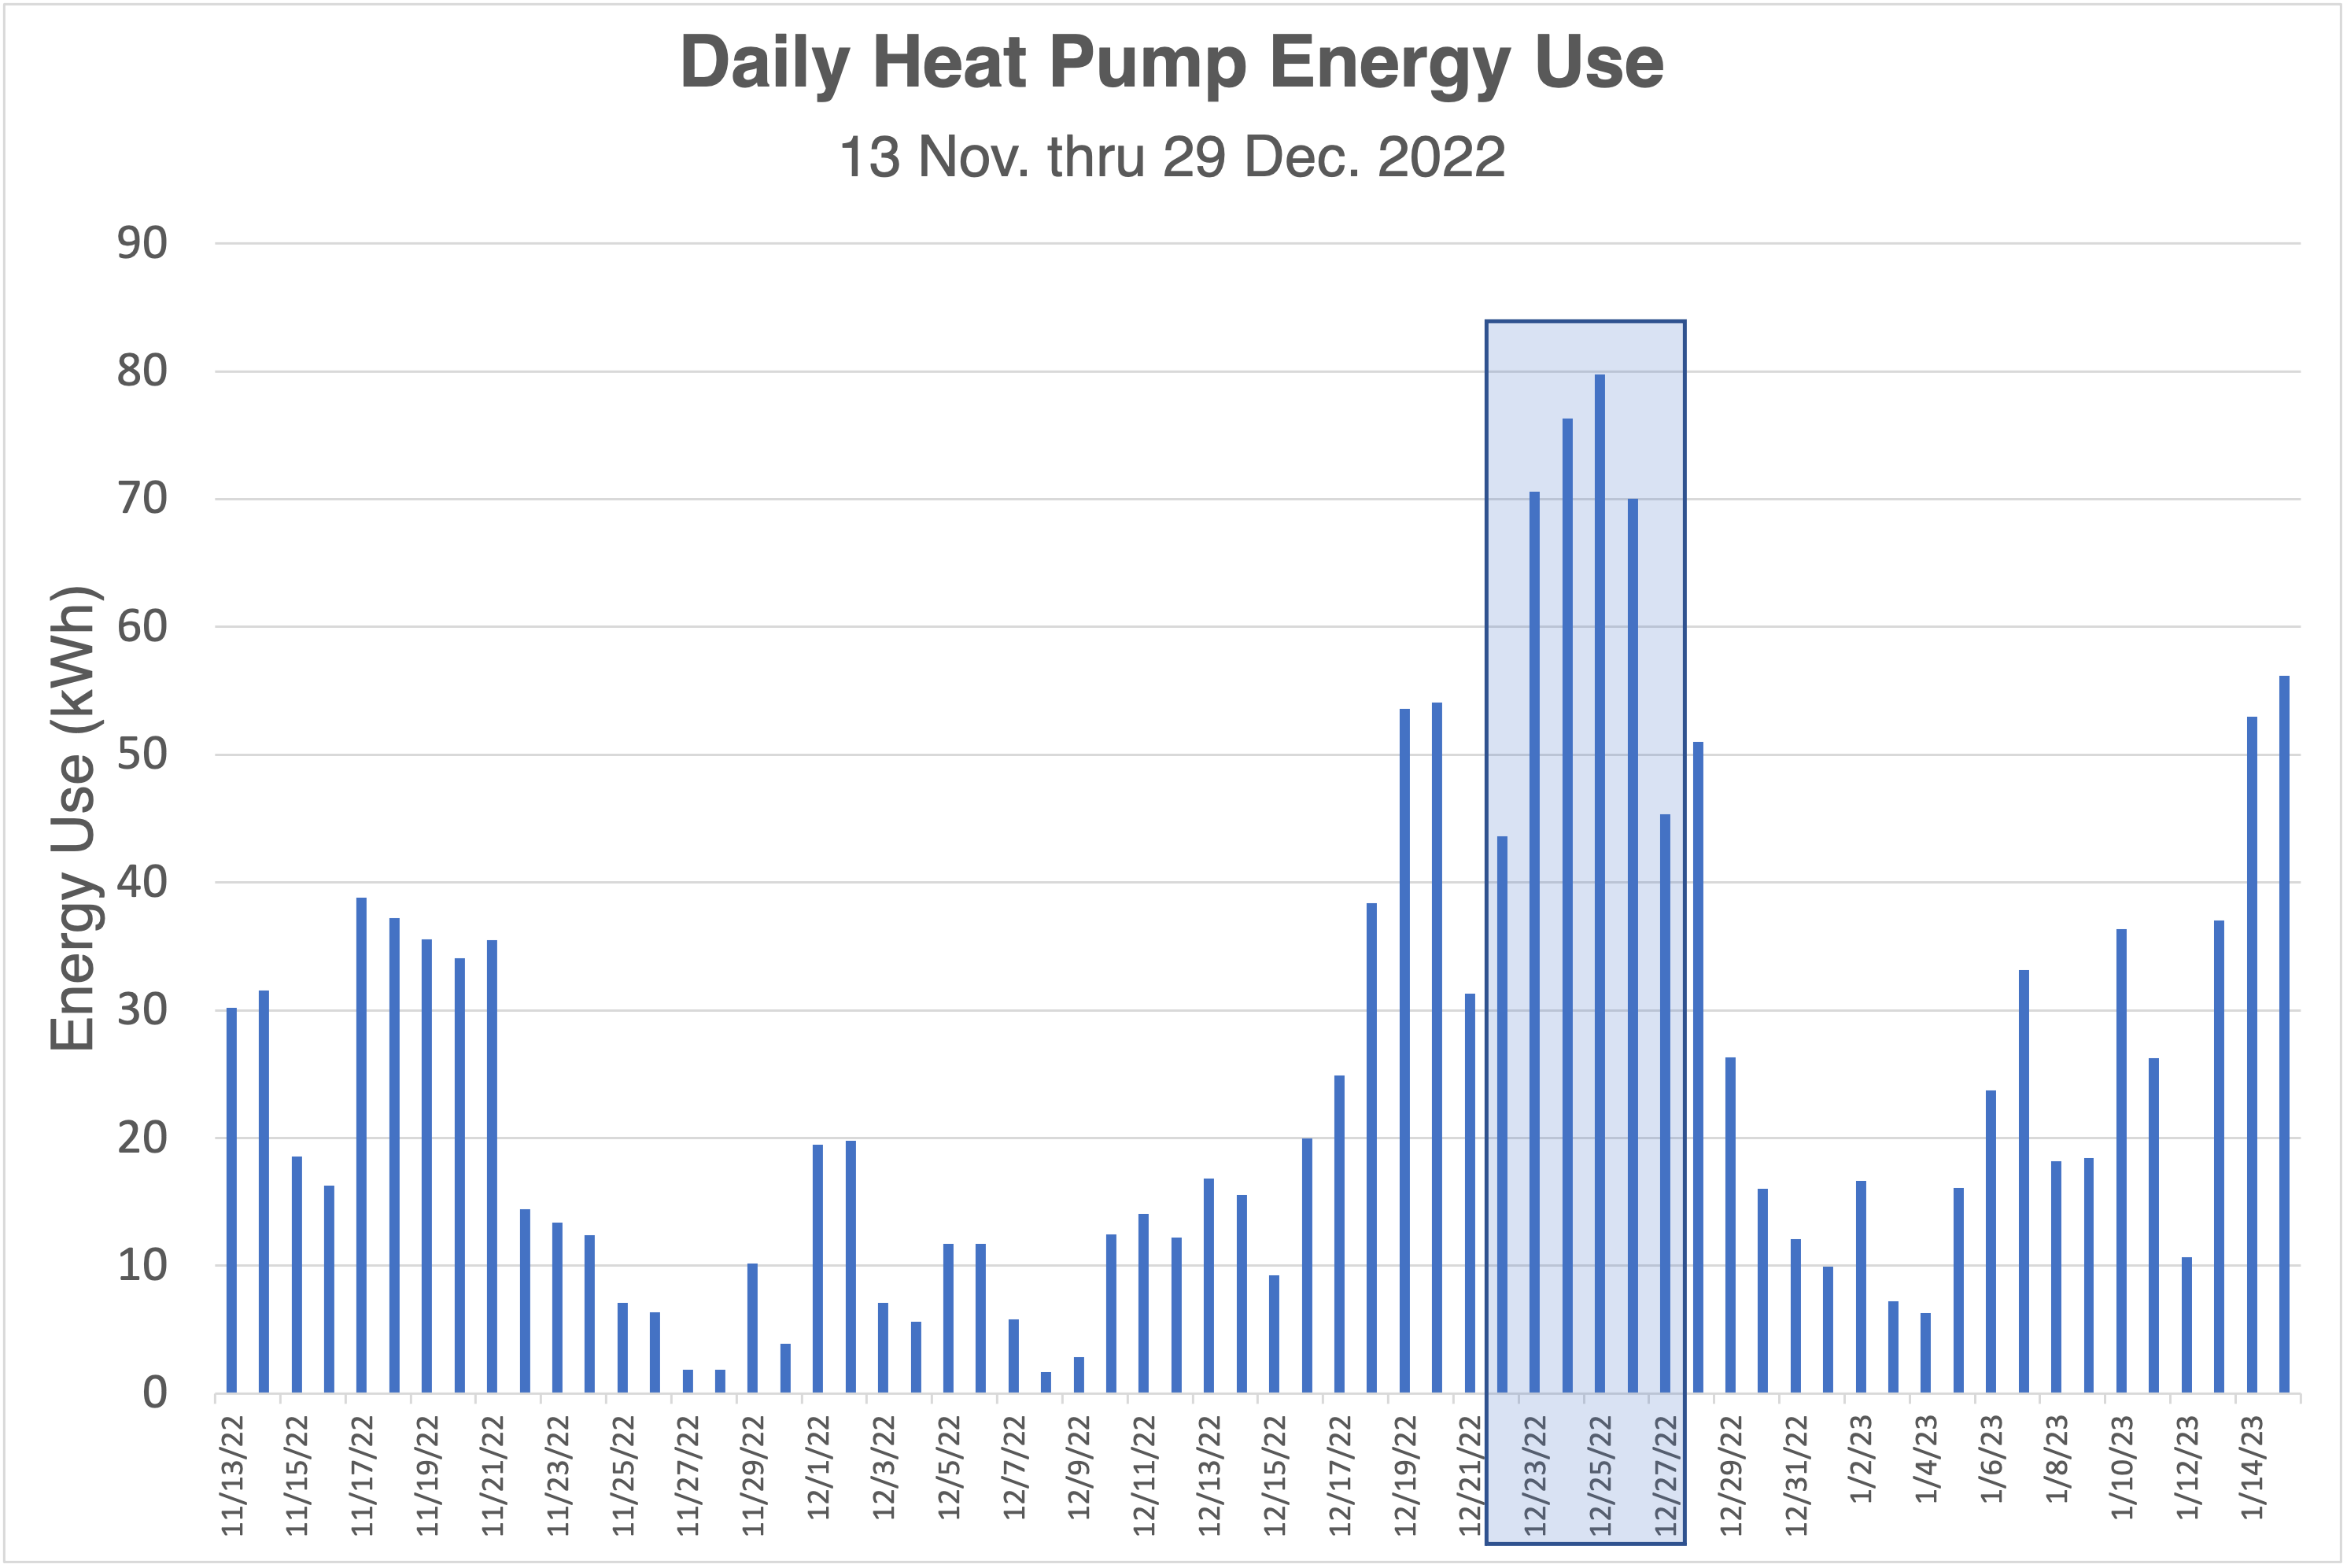 Daily heat pump energy use, with period of interest highlighted in blue